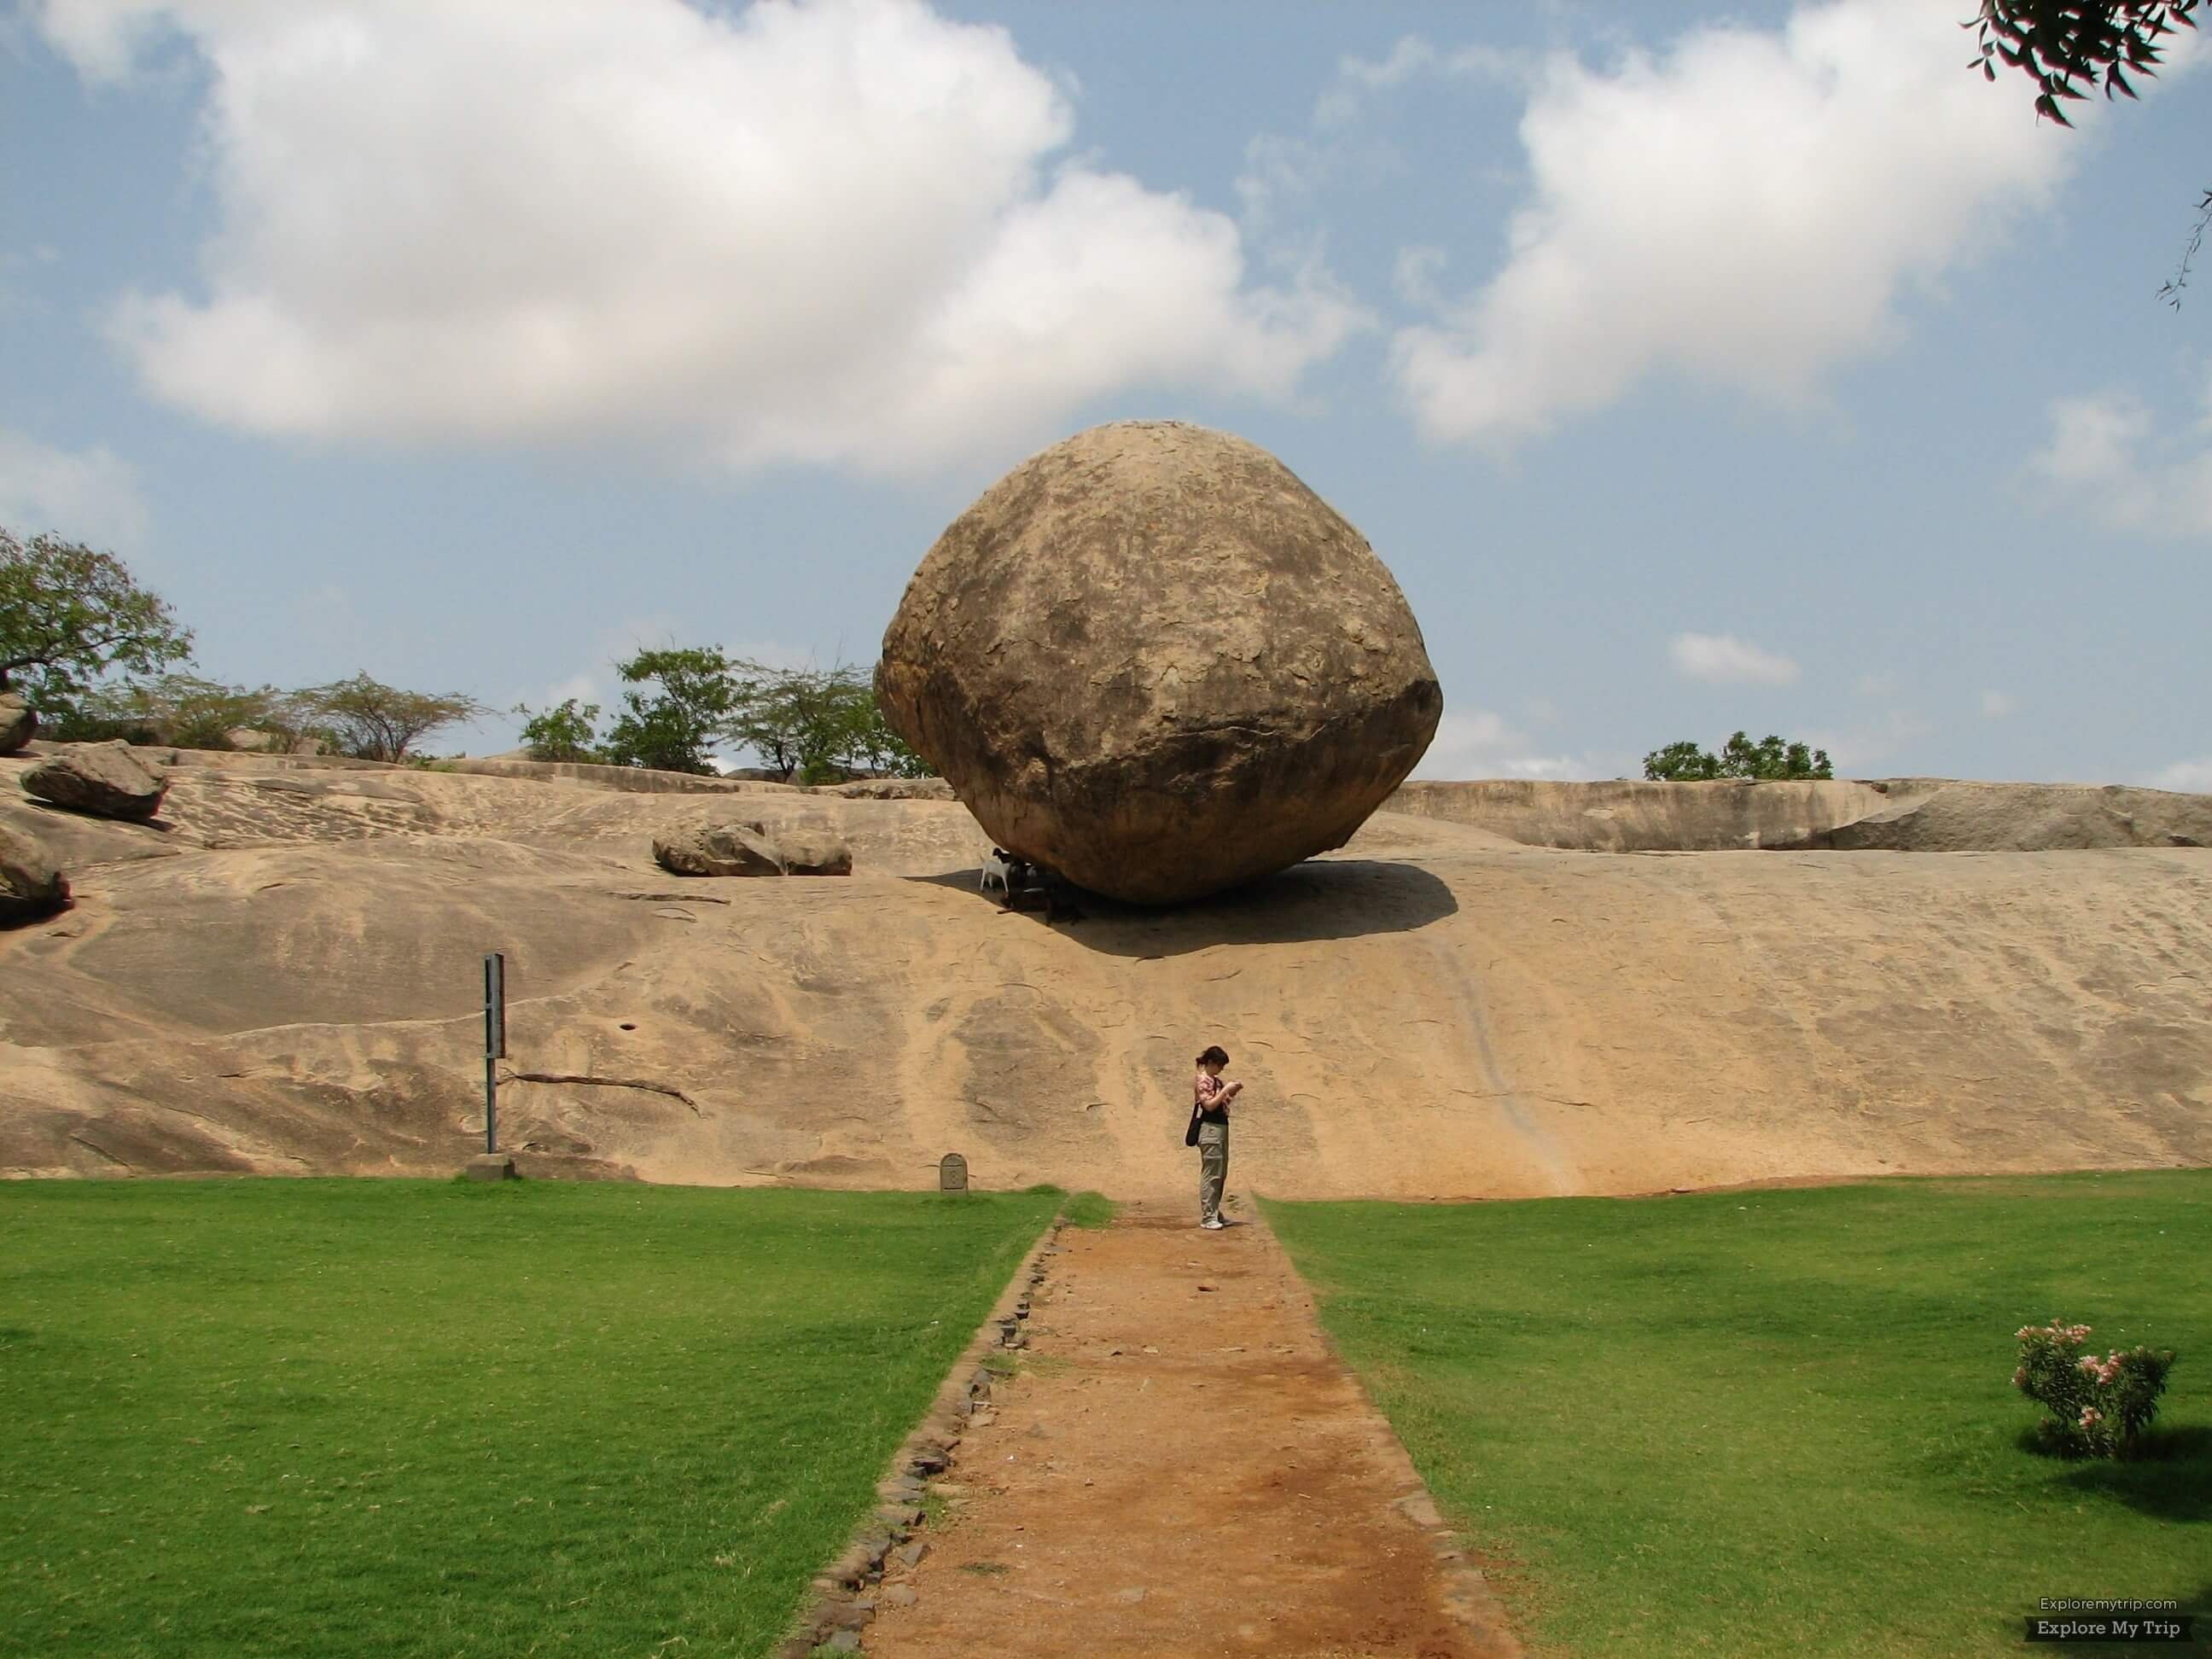 7 Elephants were not able to shake this stone, its famous as Indian God 'Krishna's butter ball'